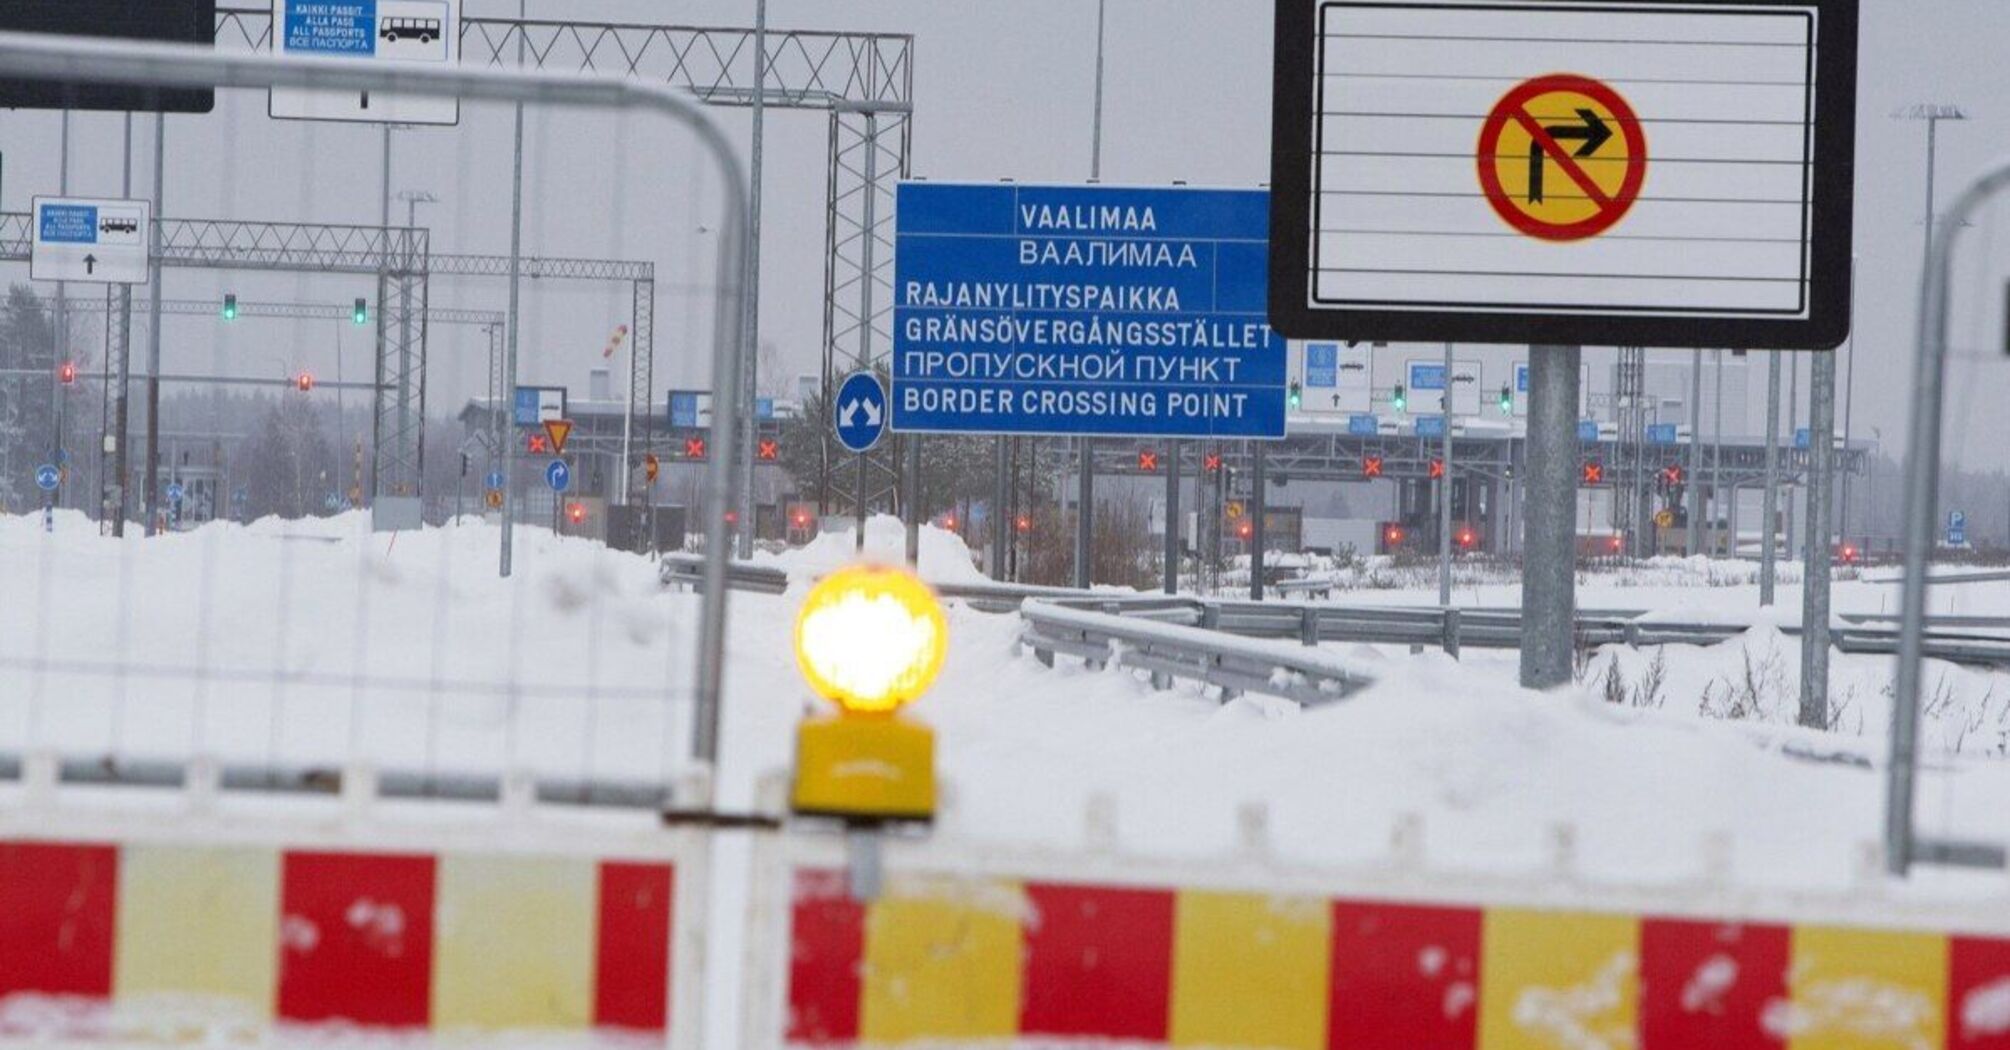 Finland will not open the border with Russia